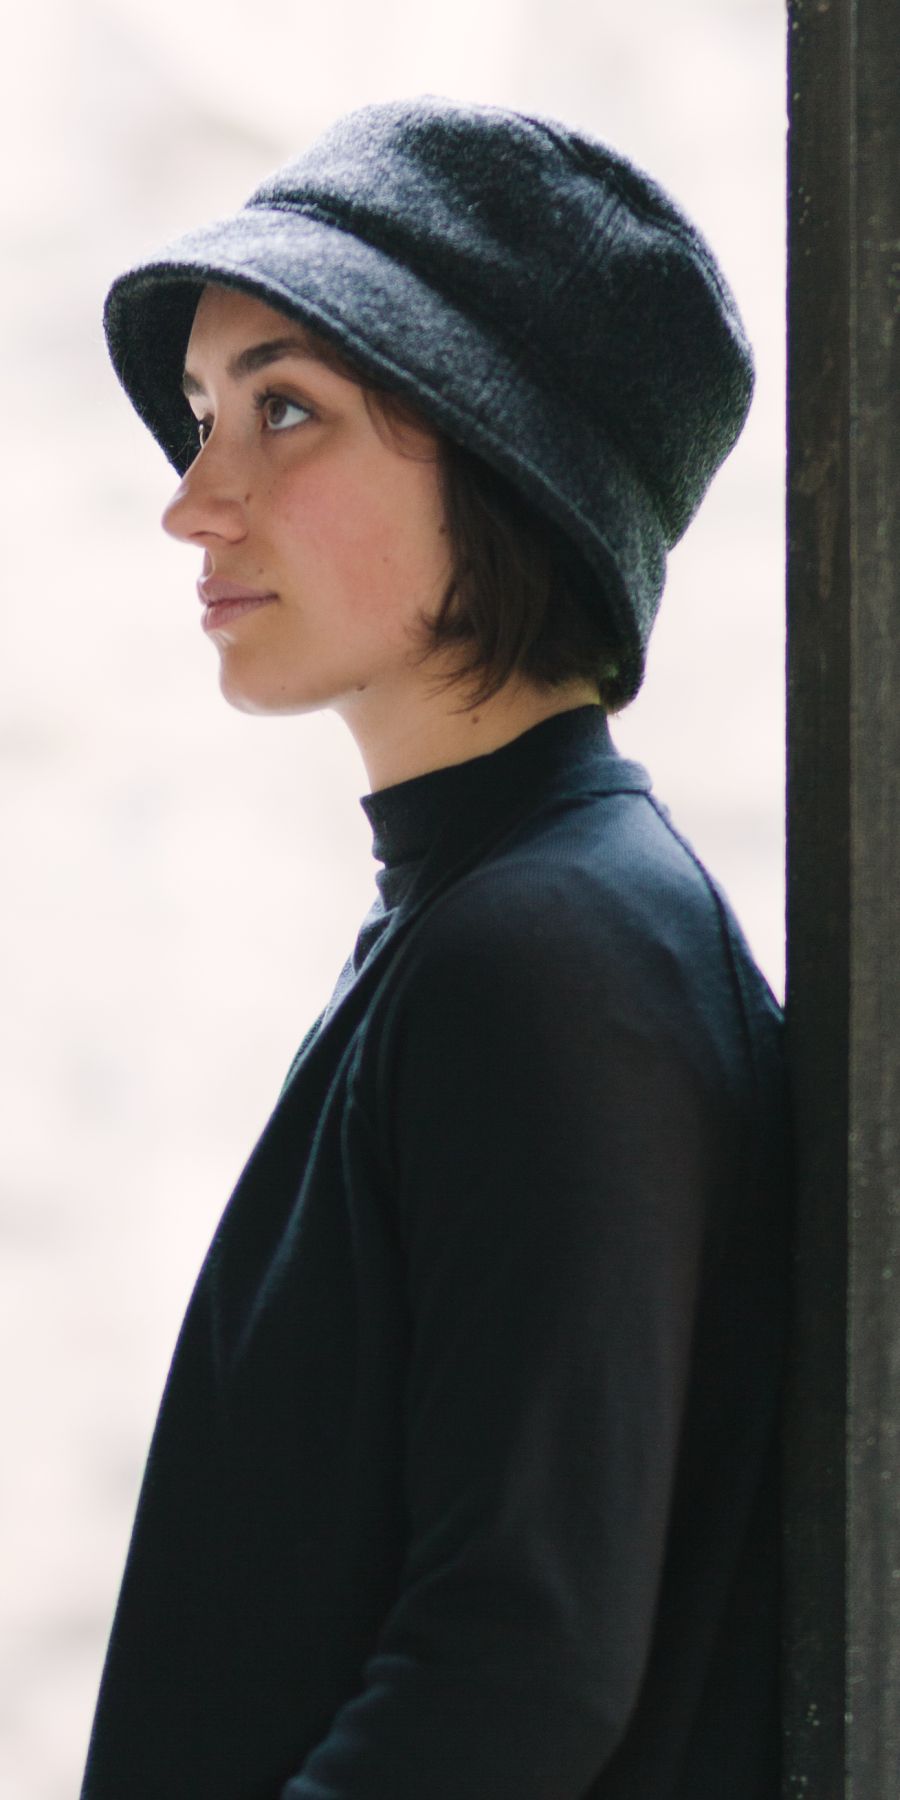 Luxuriously warm boiled wool hats to take on winter with style.  Wool is made in The Netherlands and hats are carefully made in Canada by Puffin Gear.  Choose from ball caps, pillbox hats or bucket hats. Carefully made in Canada by Puffin Gear.